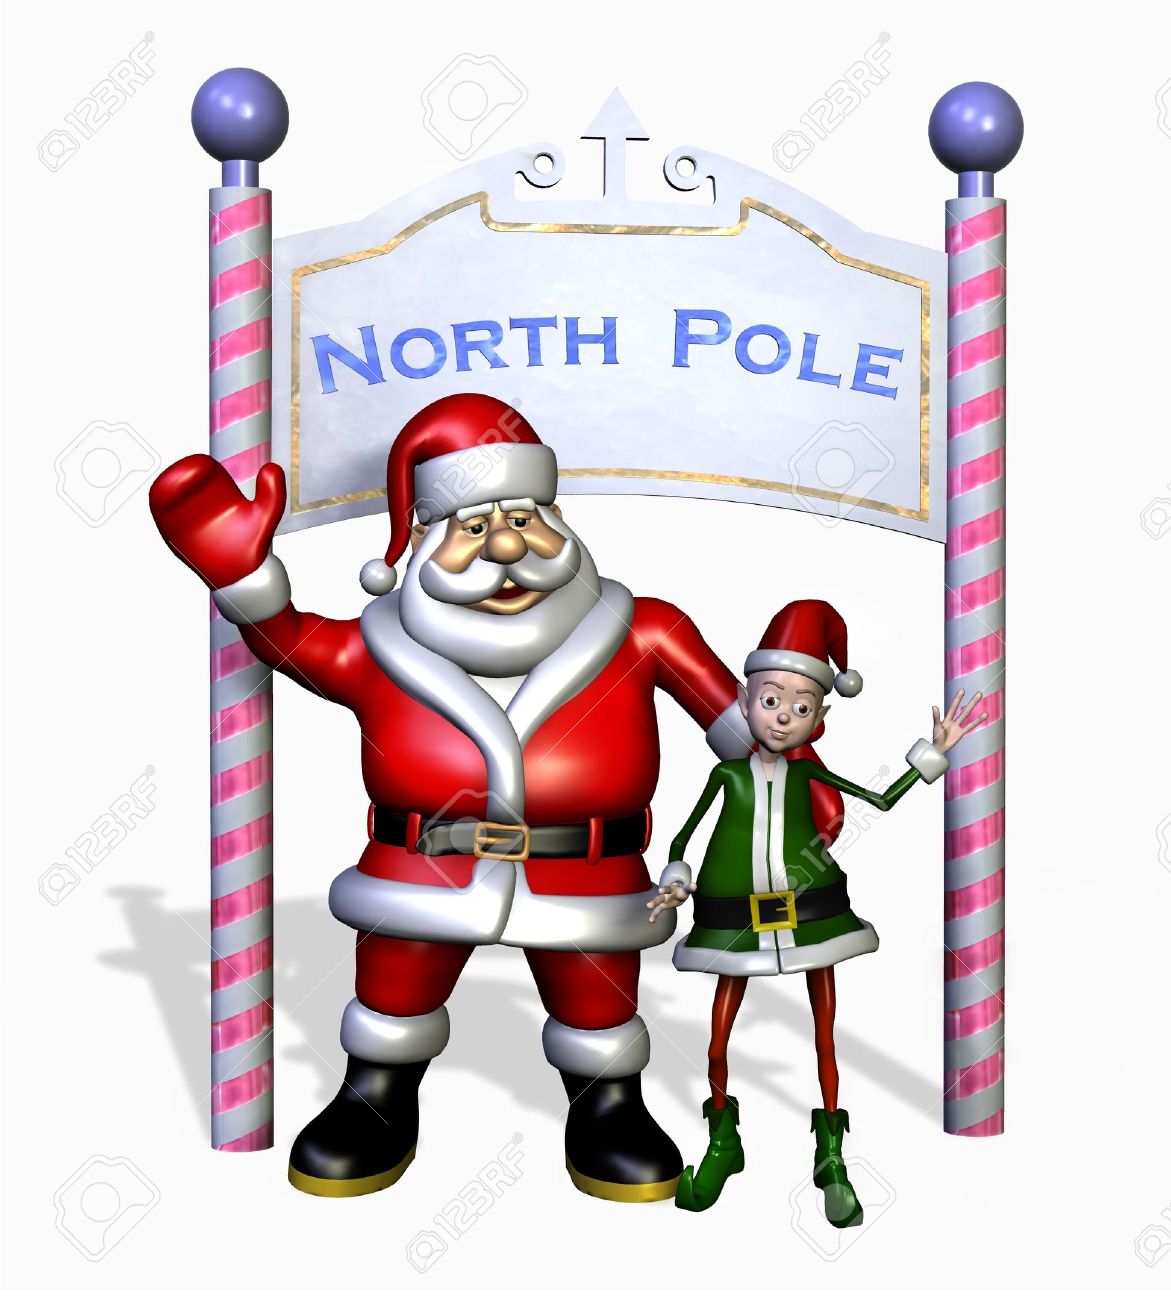 North Pole clipart #9, Download drawings